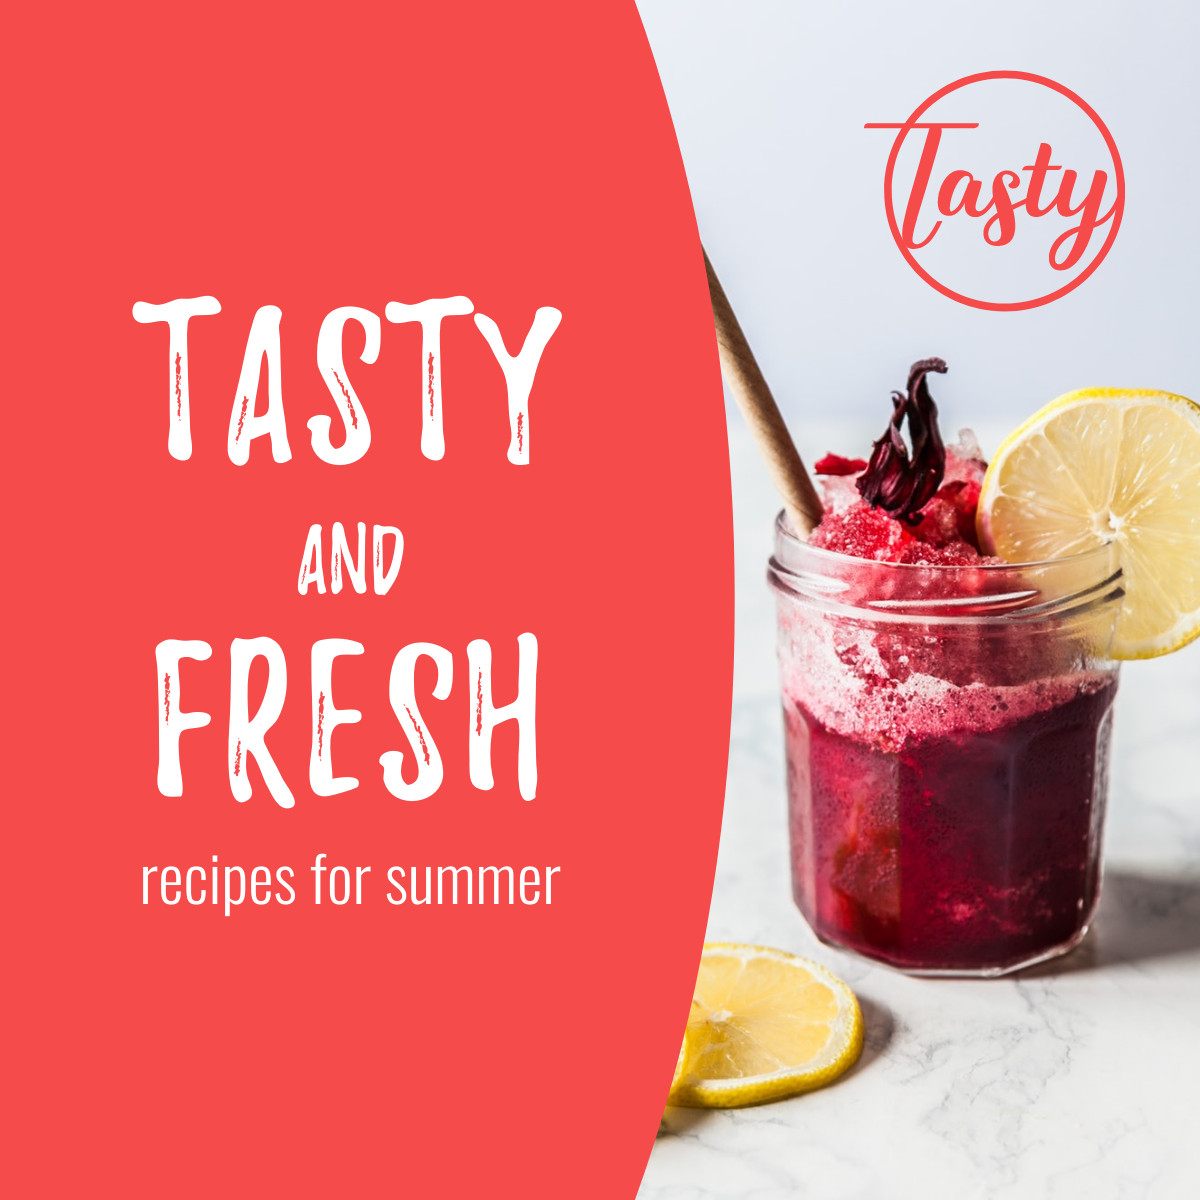 Tasty and Fresh Summer Recipes  Inline Rectangle 300x250